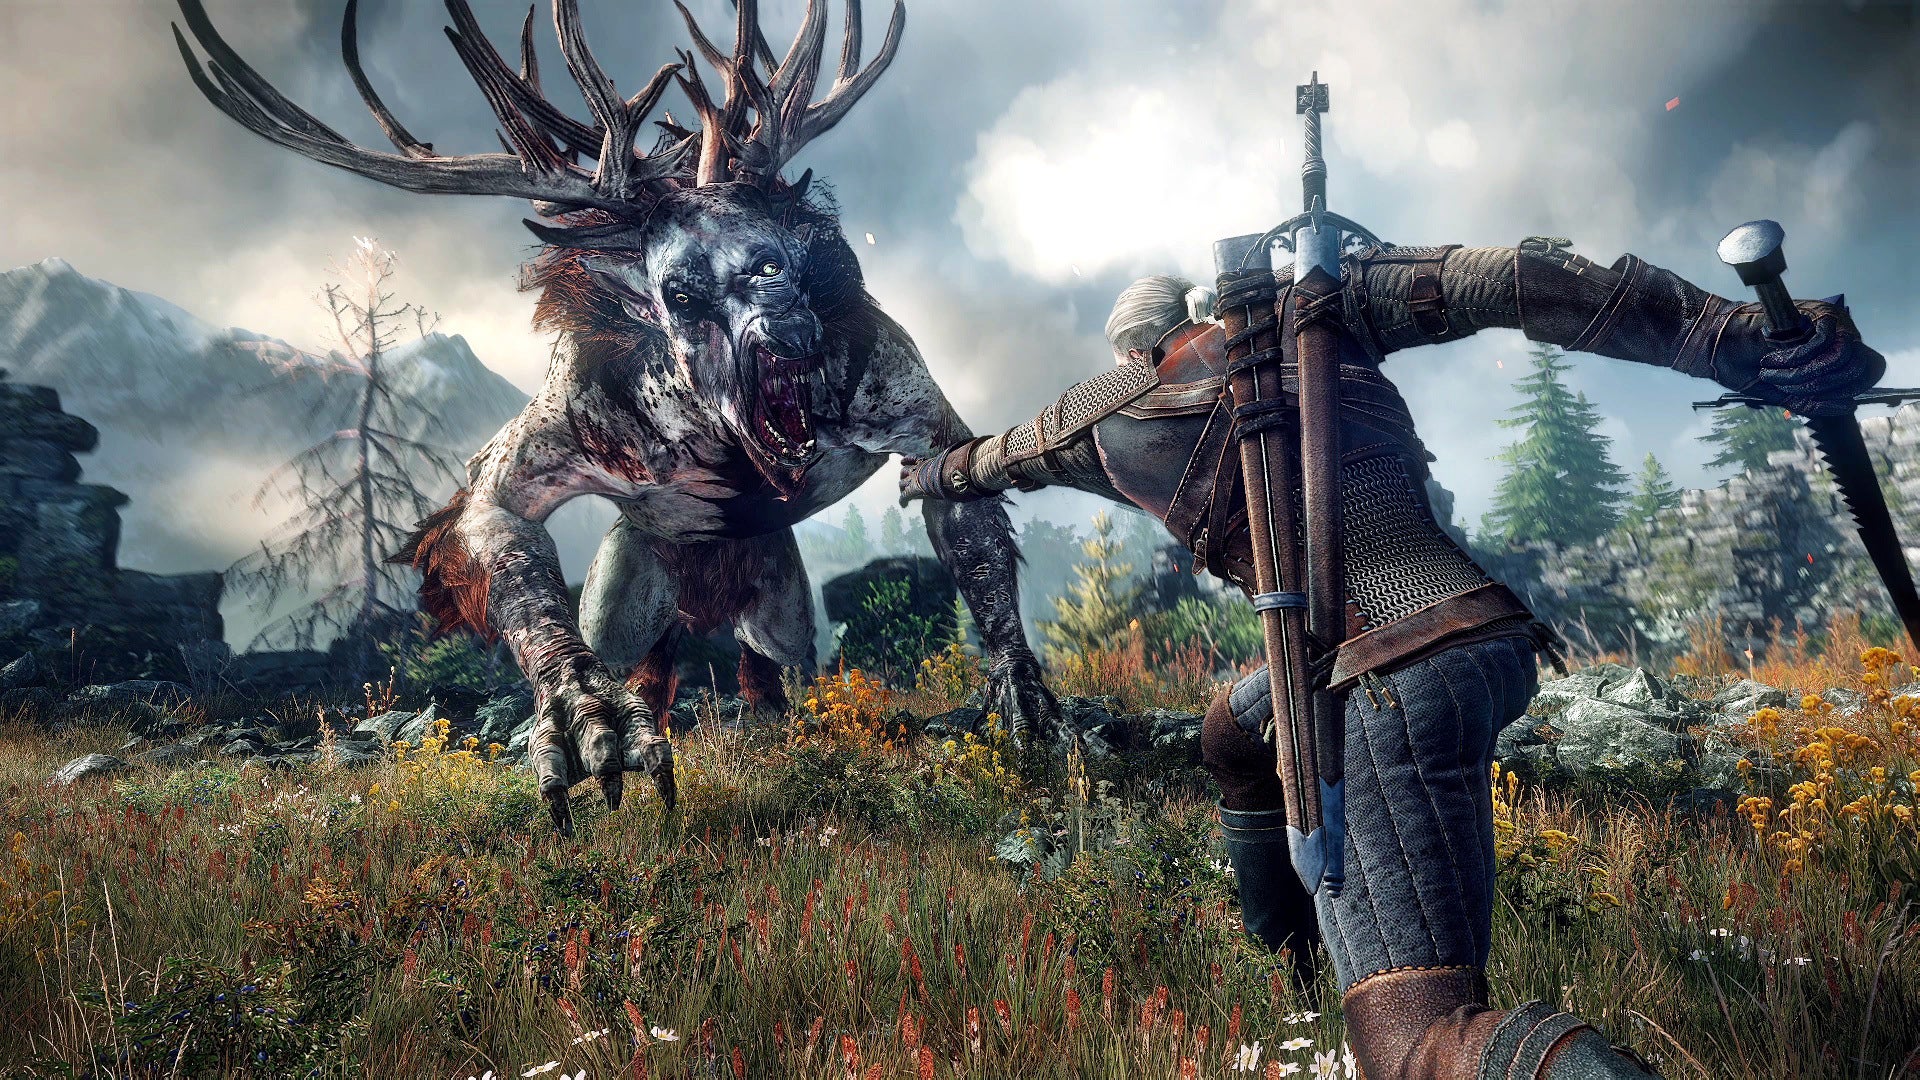 Image for The Witcher 3: PS4 Pro 4K Patch Complete Analysis + Frame-Rate Tests!